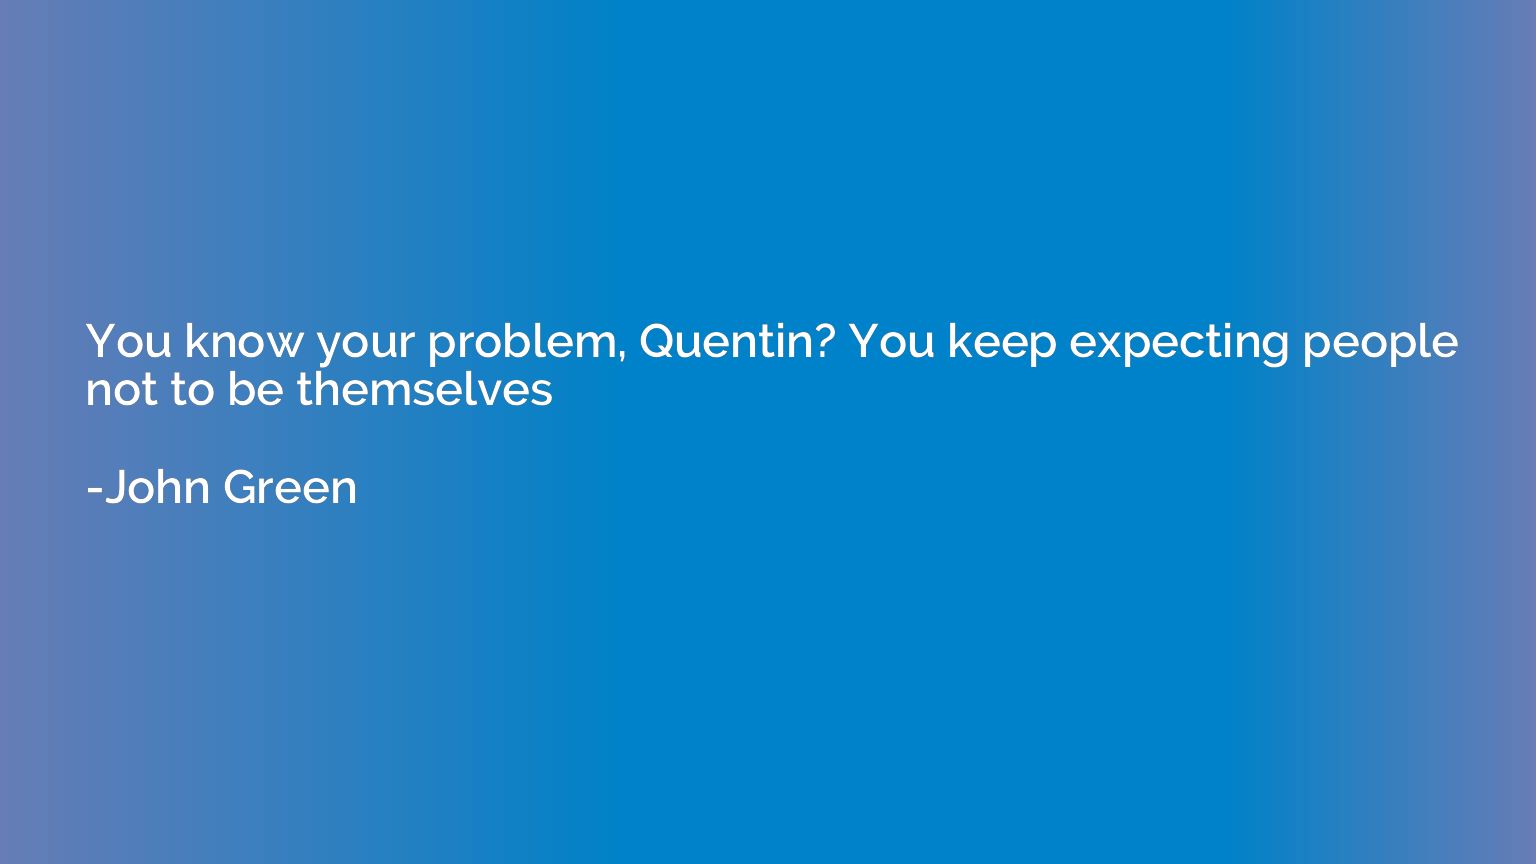 You know your problem, Quentin? You keep expecting people no